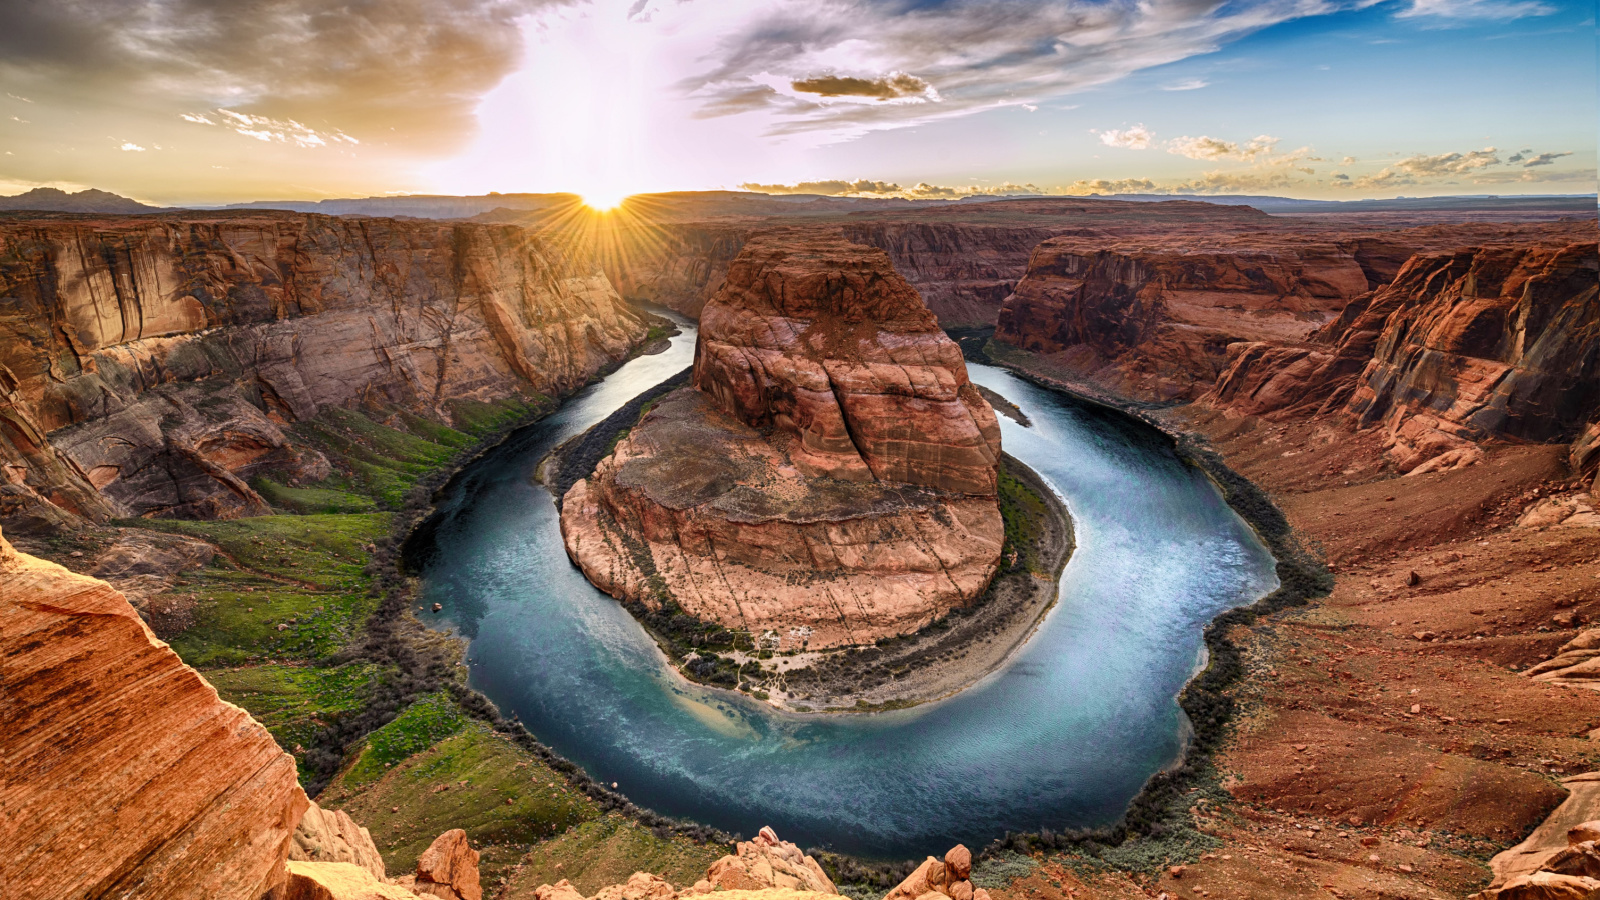 image credit: Wisanu Boonrawd/Shutterstock <p><span>The Grand Canyon’s vastness is undeniably breathtaking, but some visitors find the experience monotonous. The viewpoints can feel similar after a while, and the area lacks variety in activities. The remote location makes it a significant commitment for travelers. While majestic, it’s not everyone’s ideal destination.</span></p>